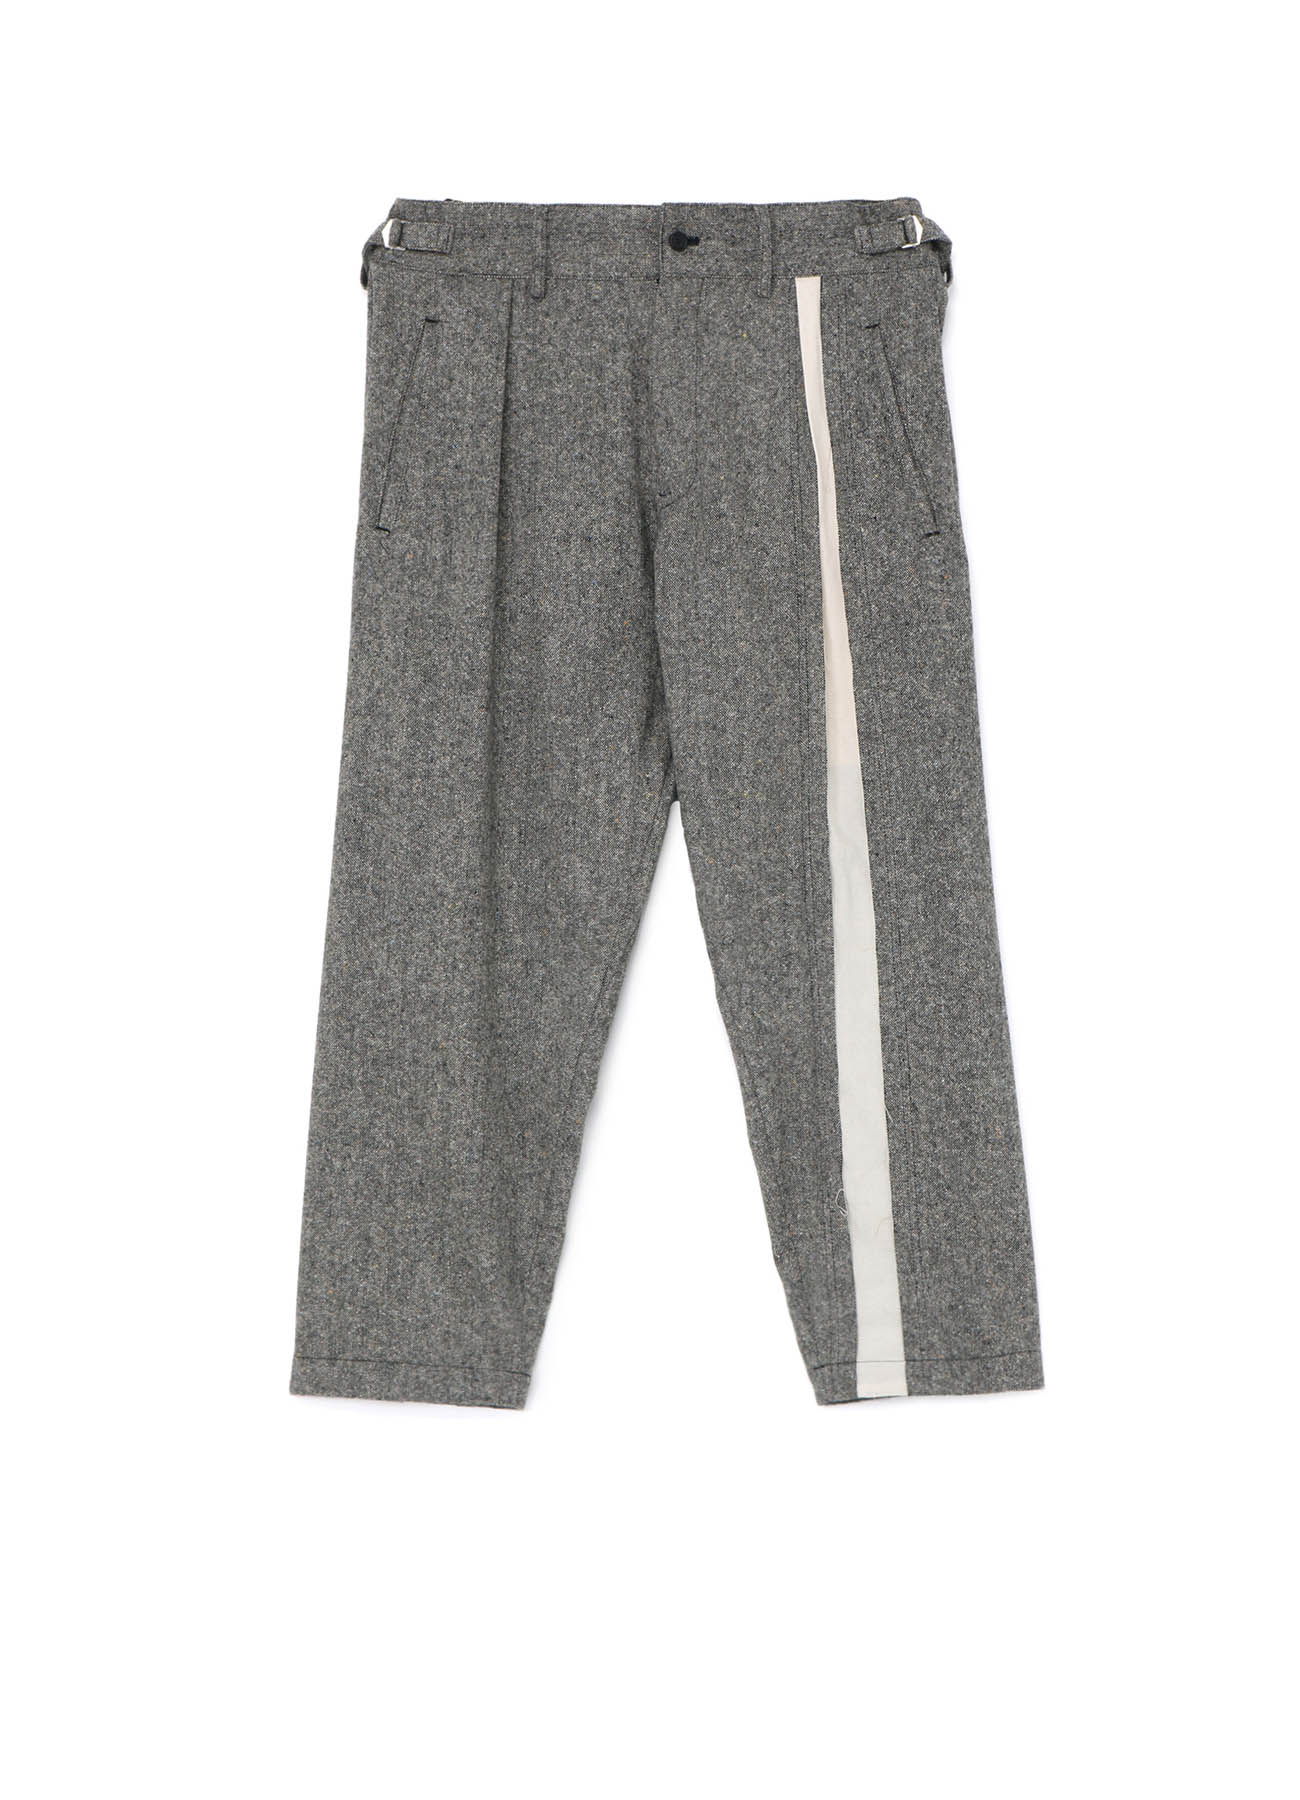 Etermine Nep Tweed+Cotton Twill Left Front Switching One-tuck Pants